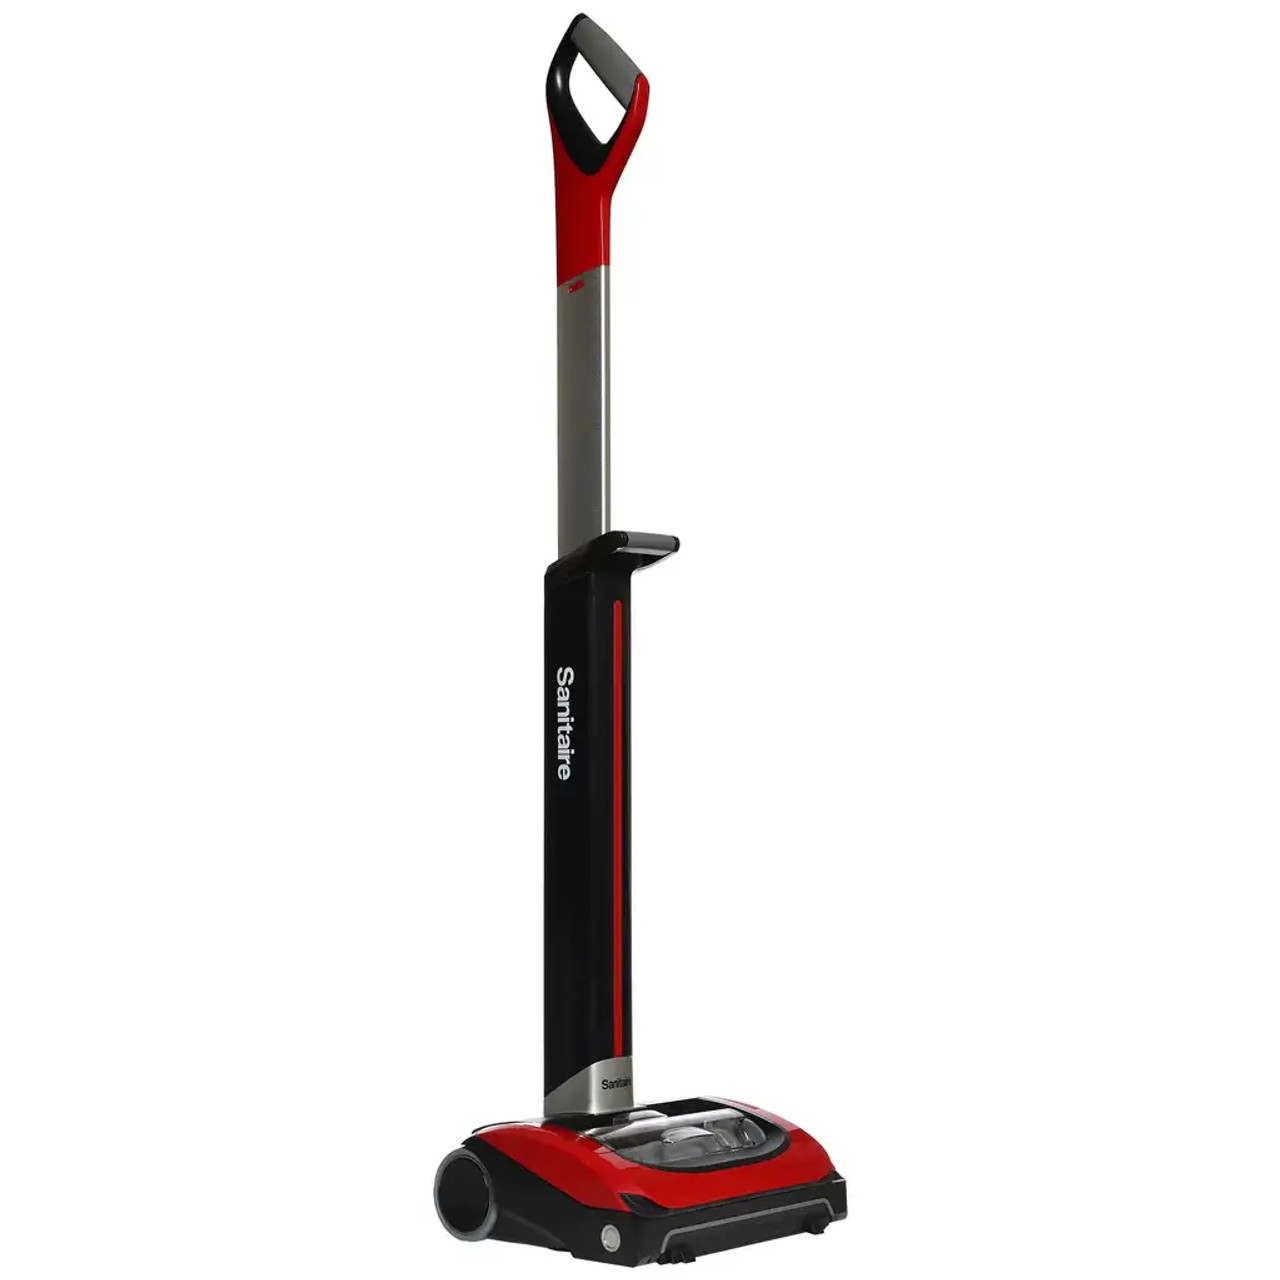 Sanitaire TRACER 12" Cordless Upright Vacuum Cleaner | Wireless Freedom for Effortless Cleaning